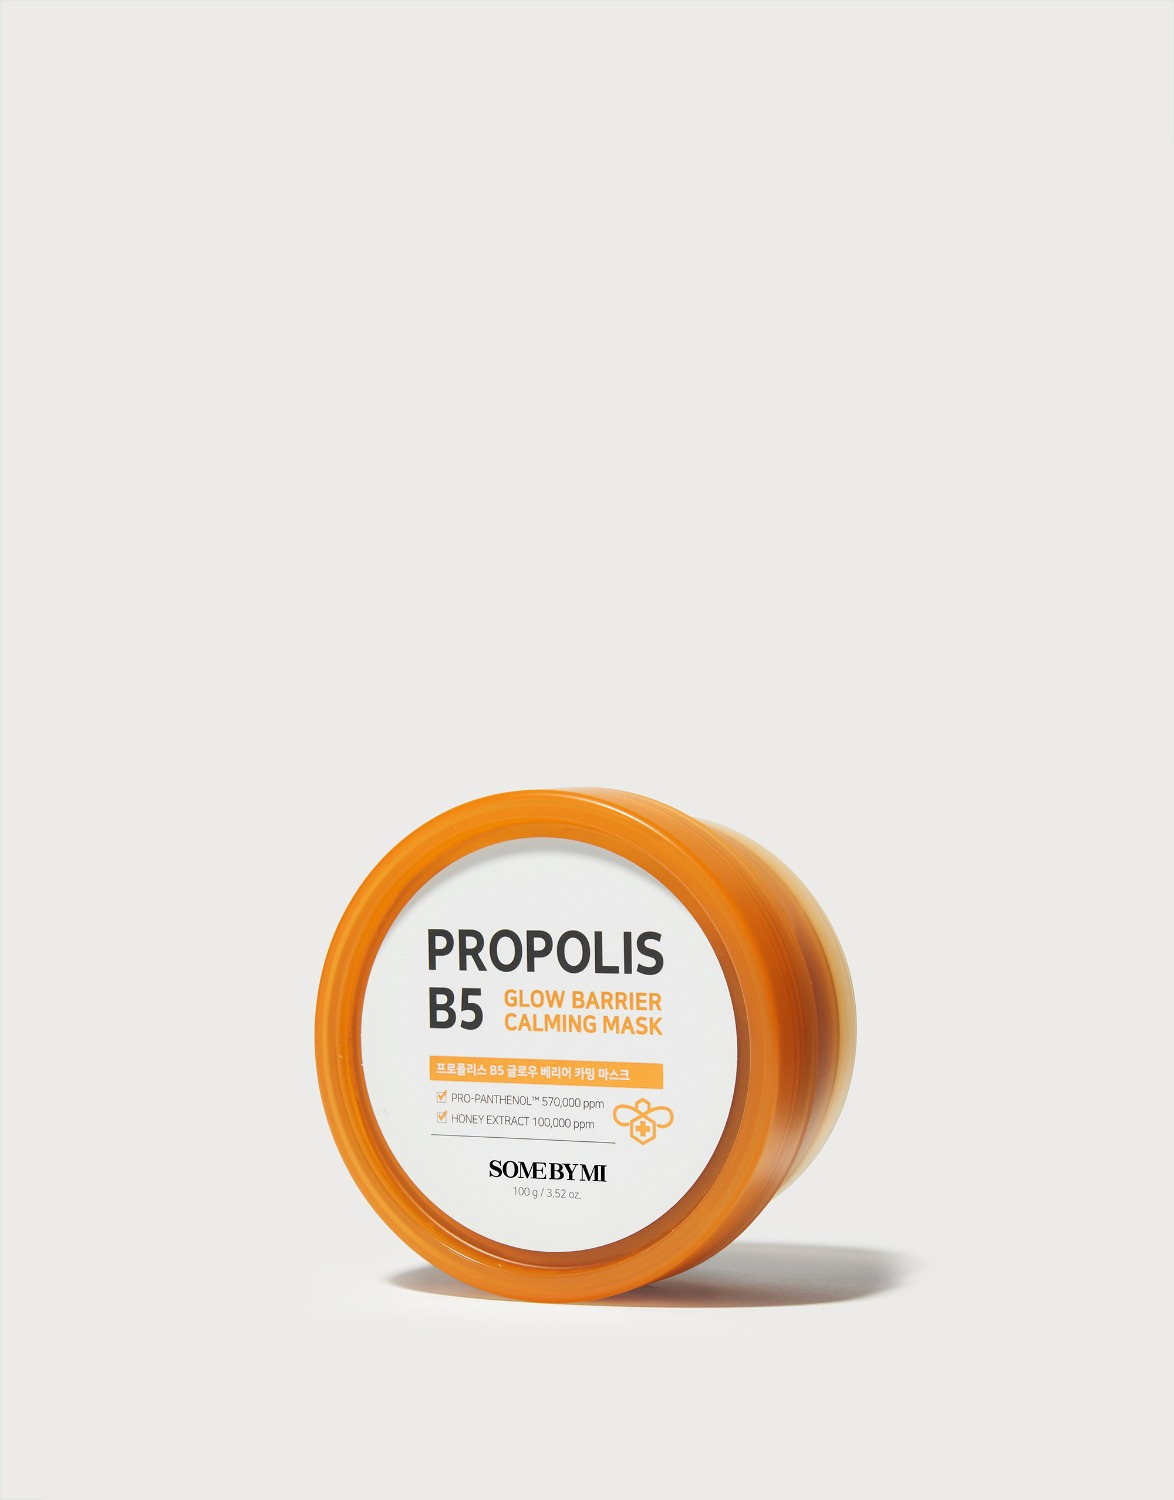 [Some By Mi] Propolis B5 Glow Barrier Calming Mask 100g